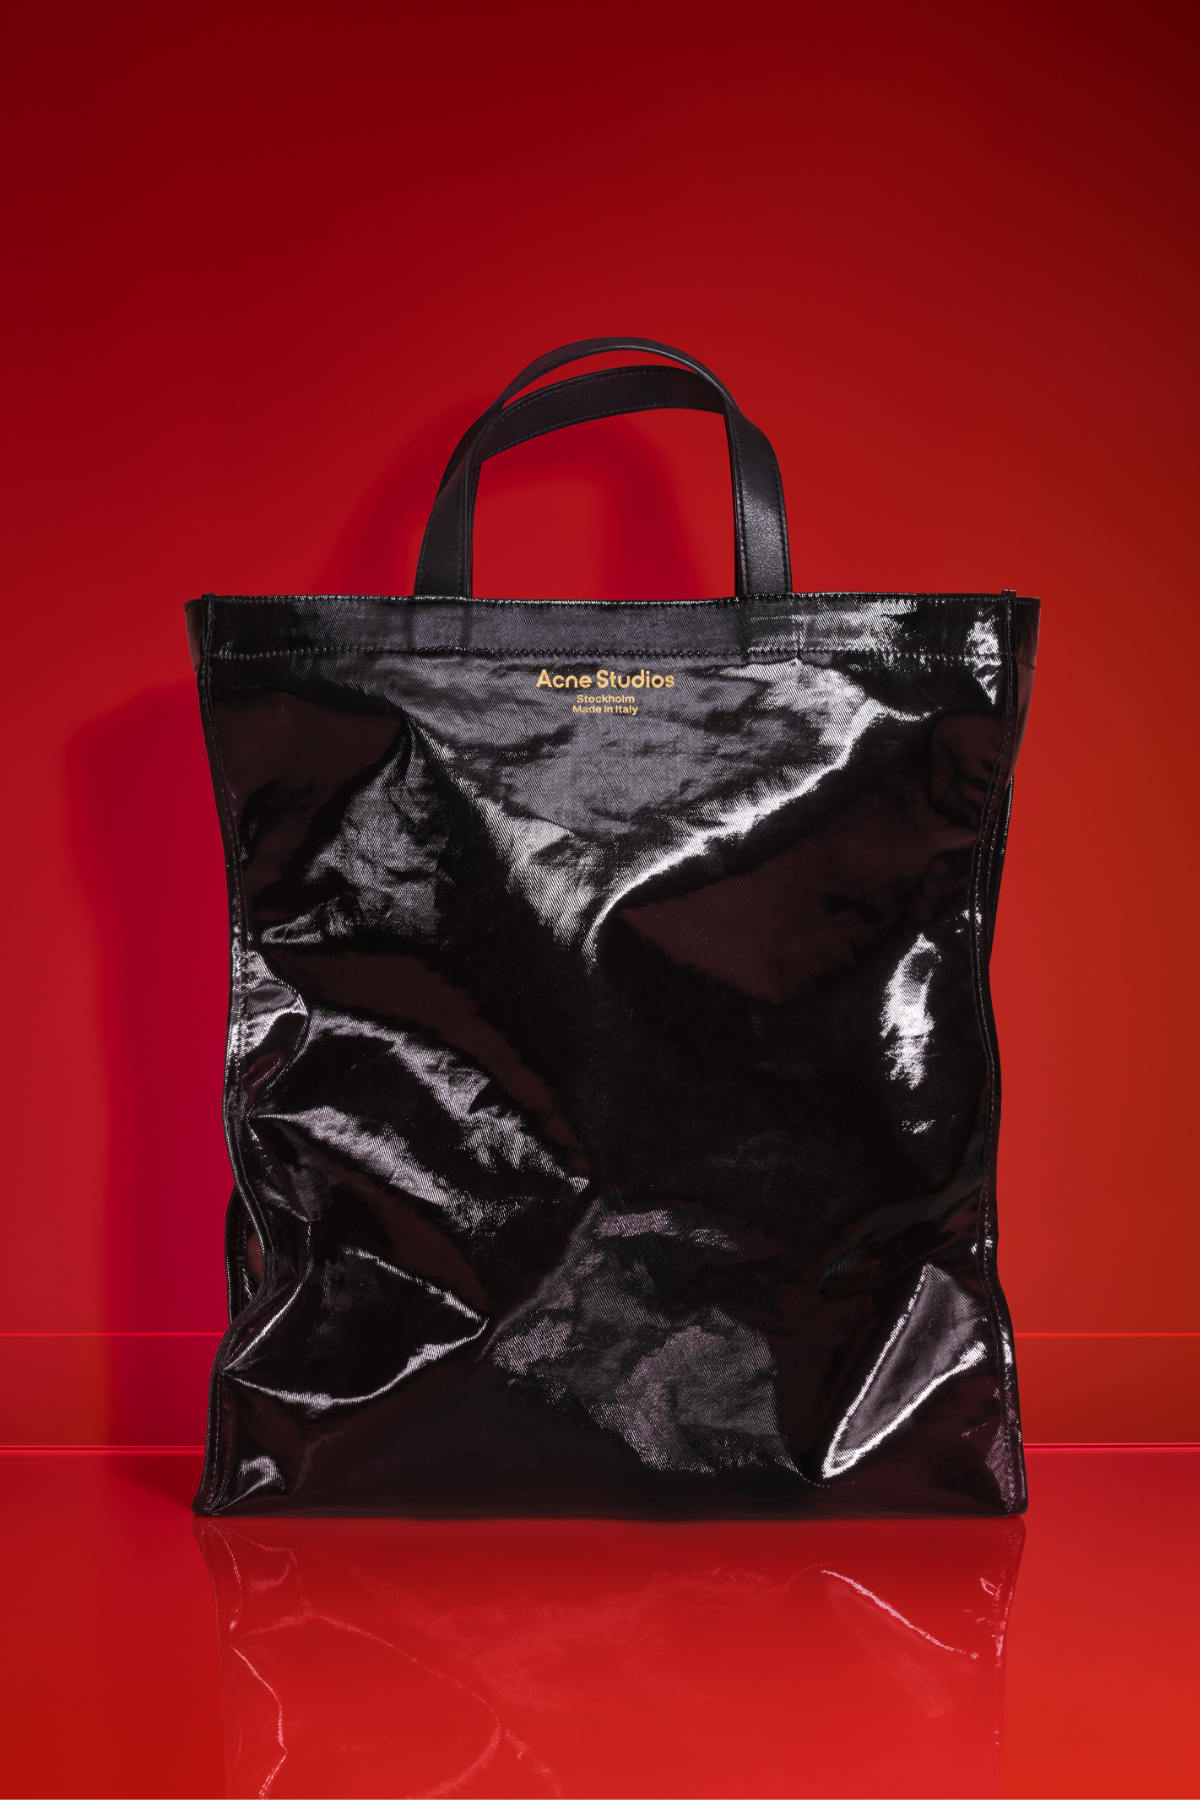 Acne Studios Introduces The New Distortion Bag For Fall/Winter 2021